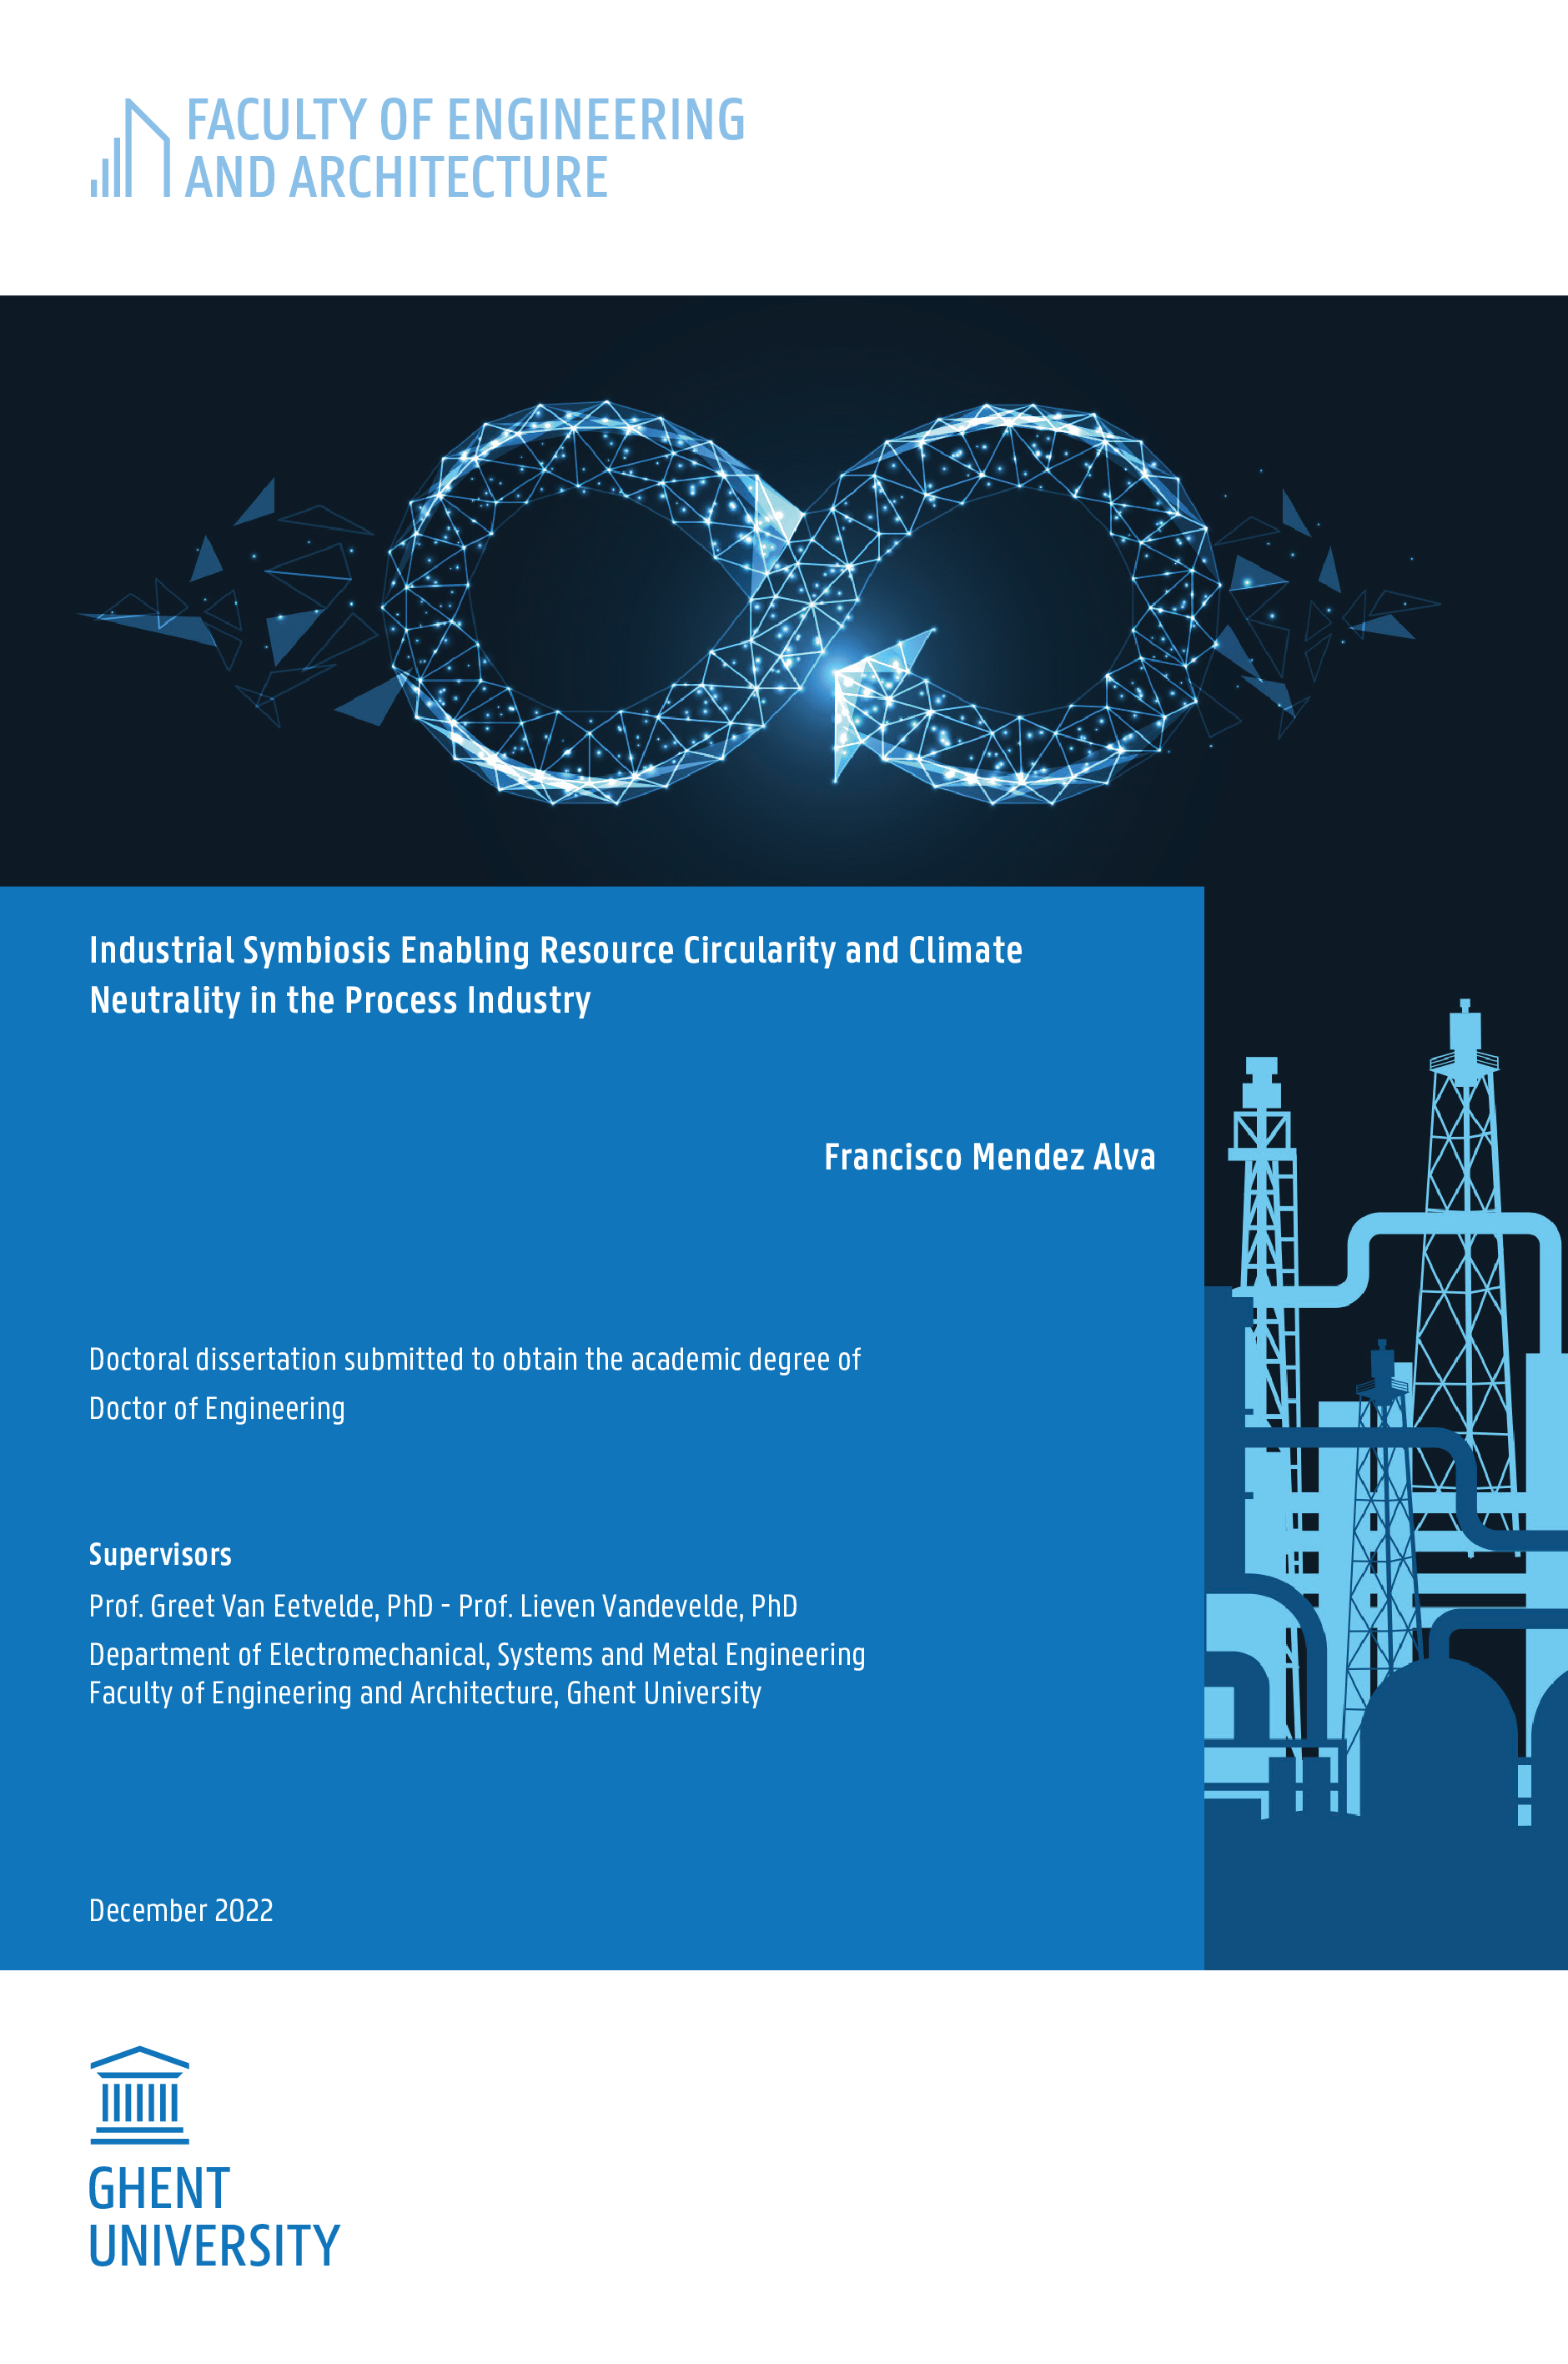 Industrial Symbiosis Enabling Resource Circularity and Climate Neutrality in the Process Industry